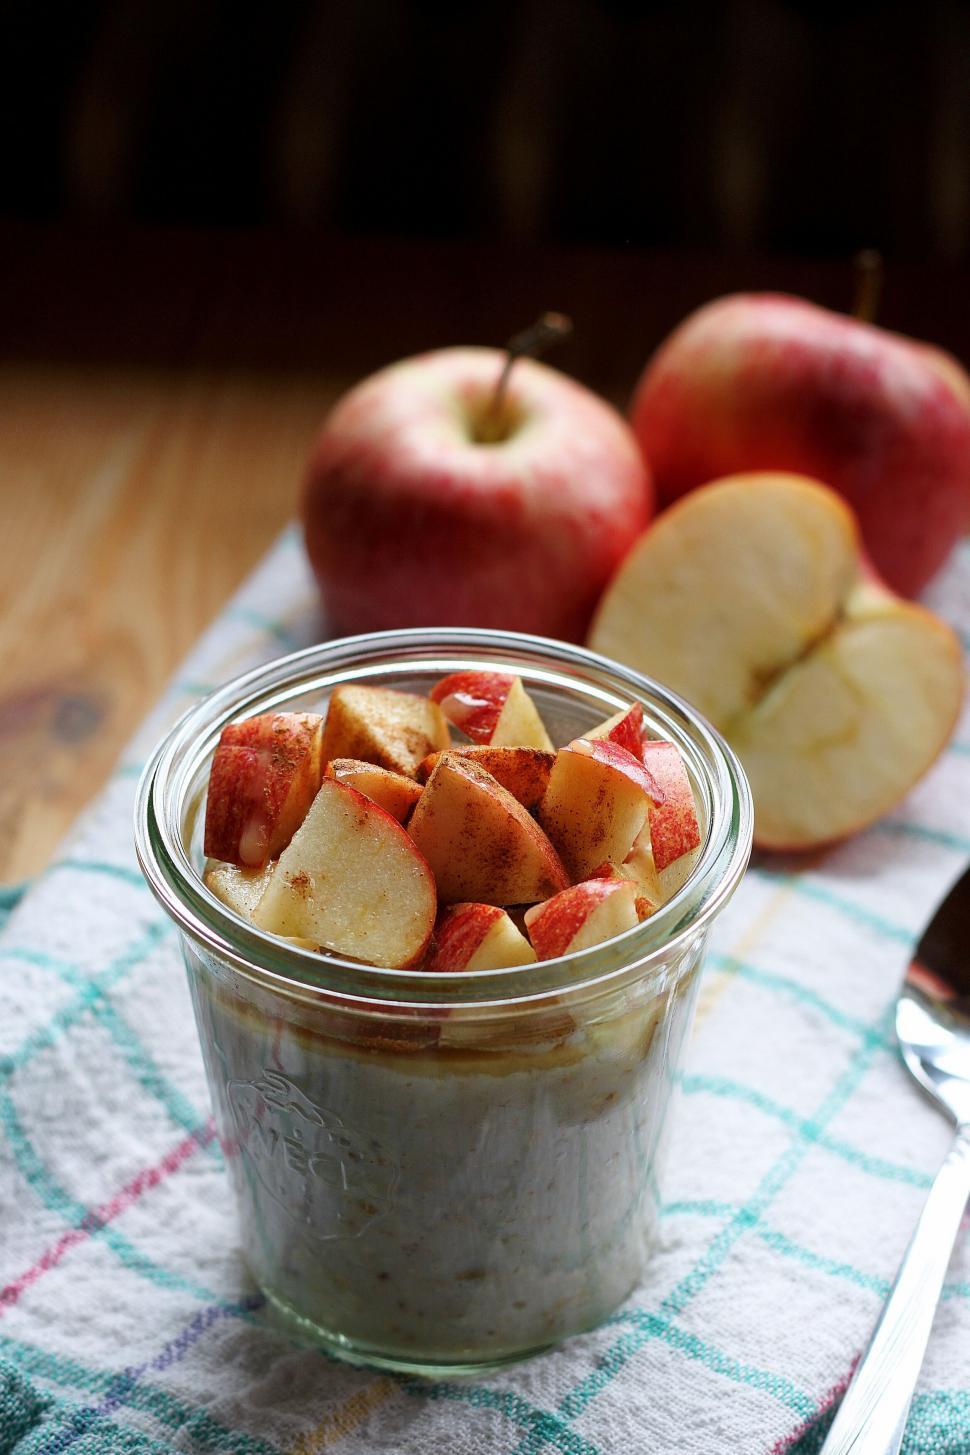 Free Image of Apples and oats healthy breakfast in jar 